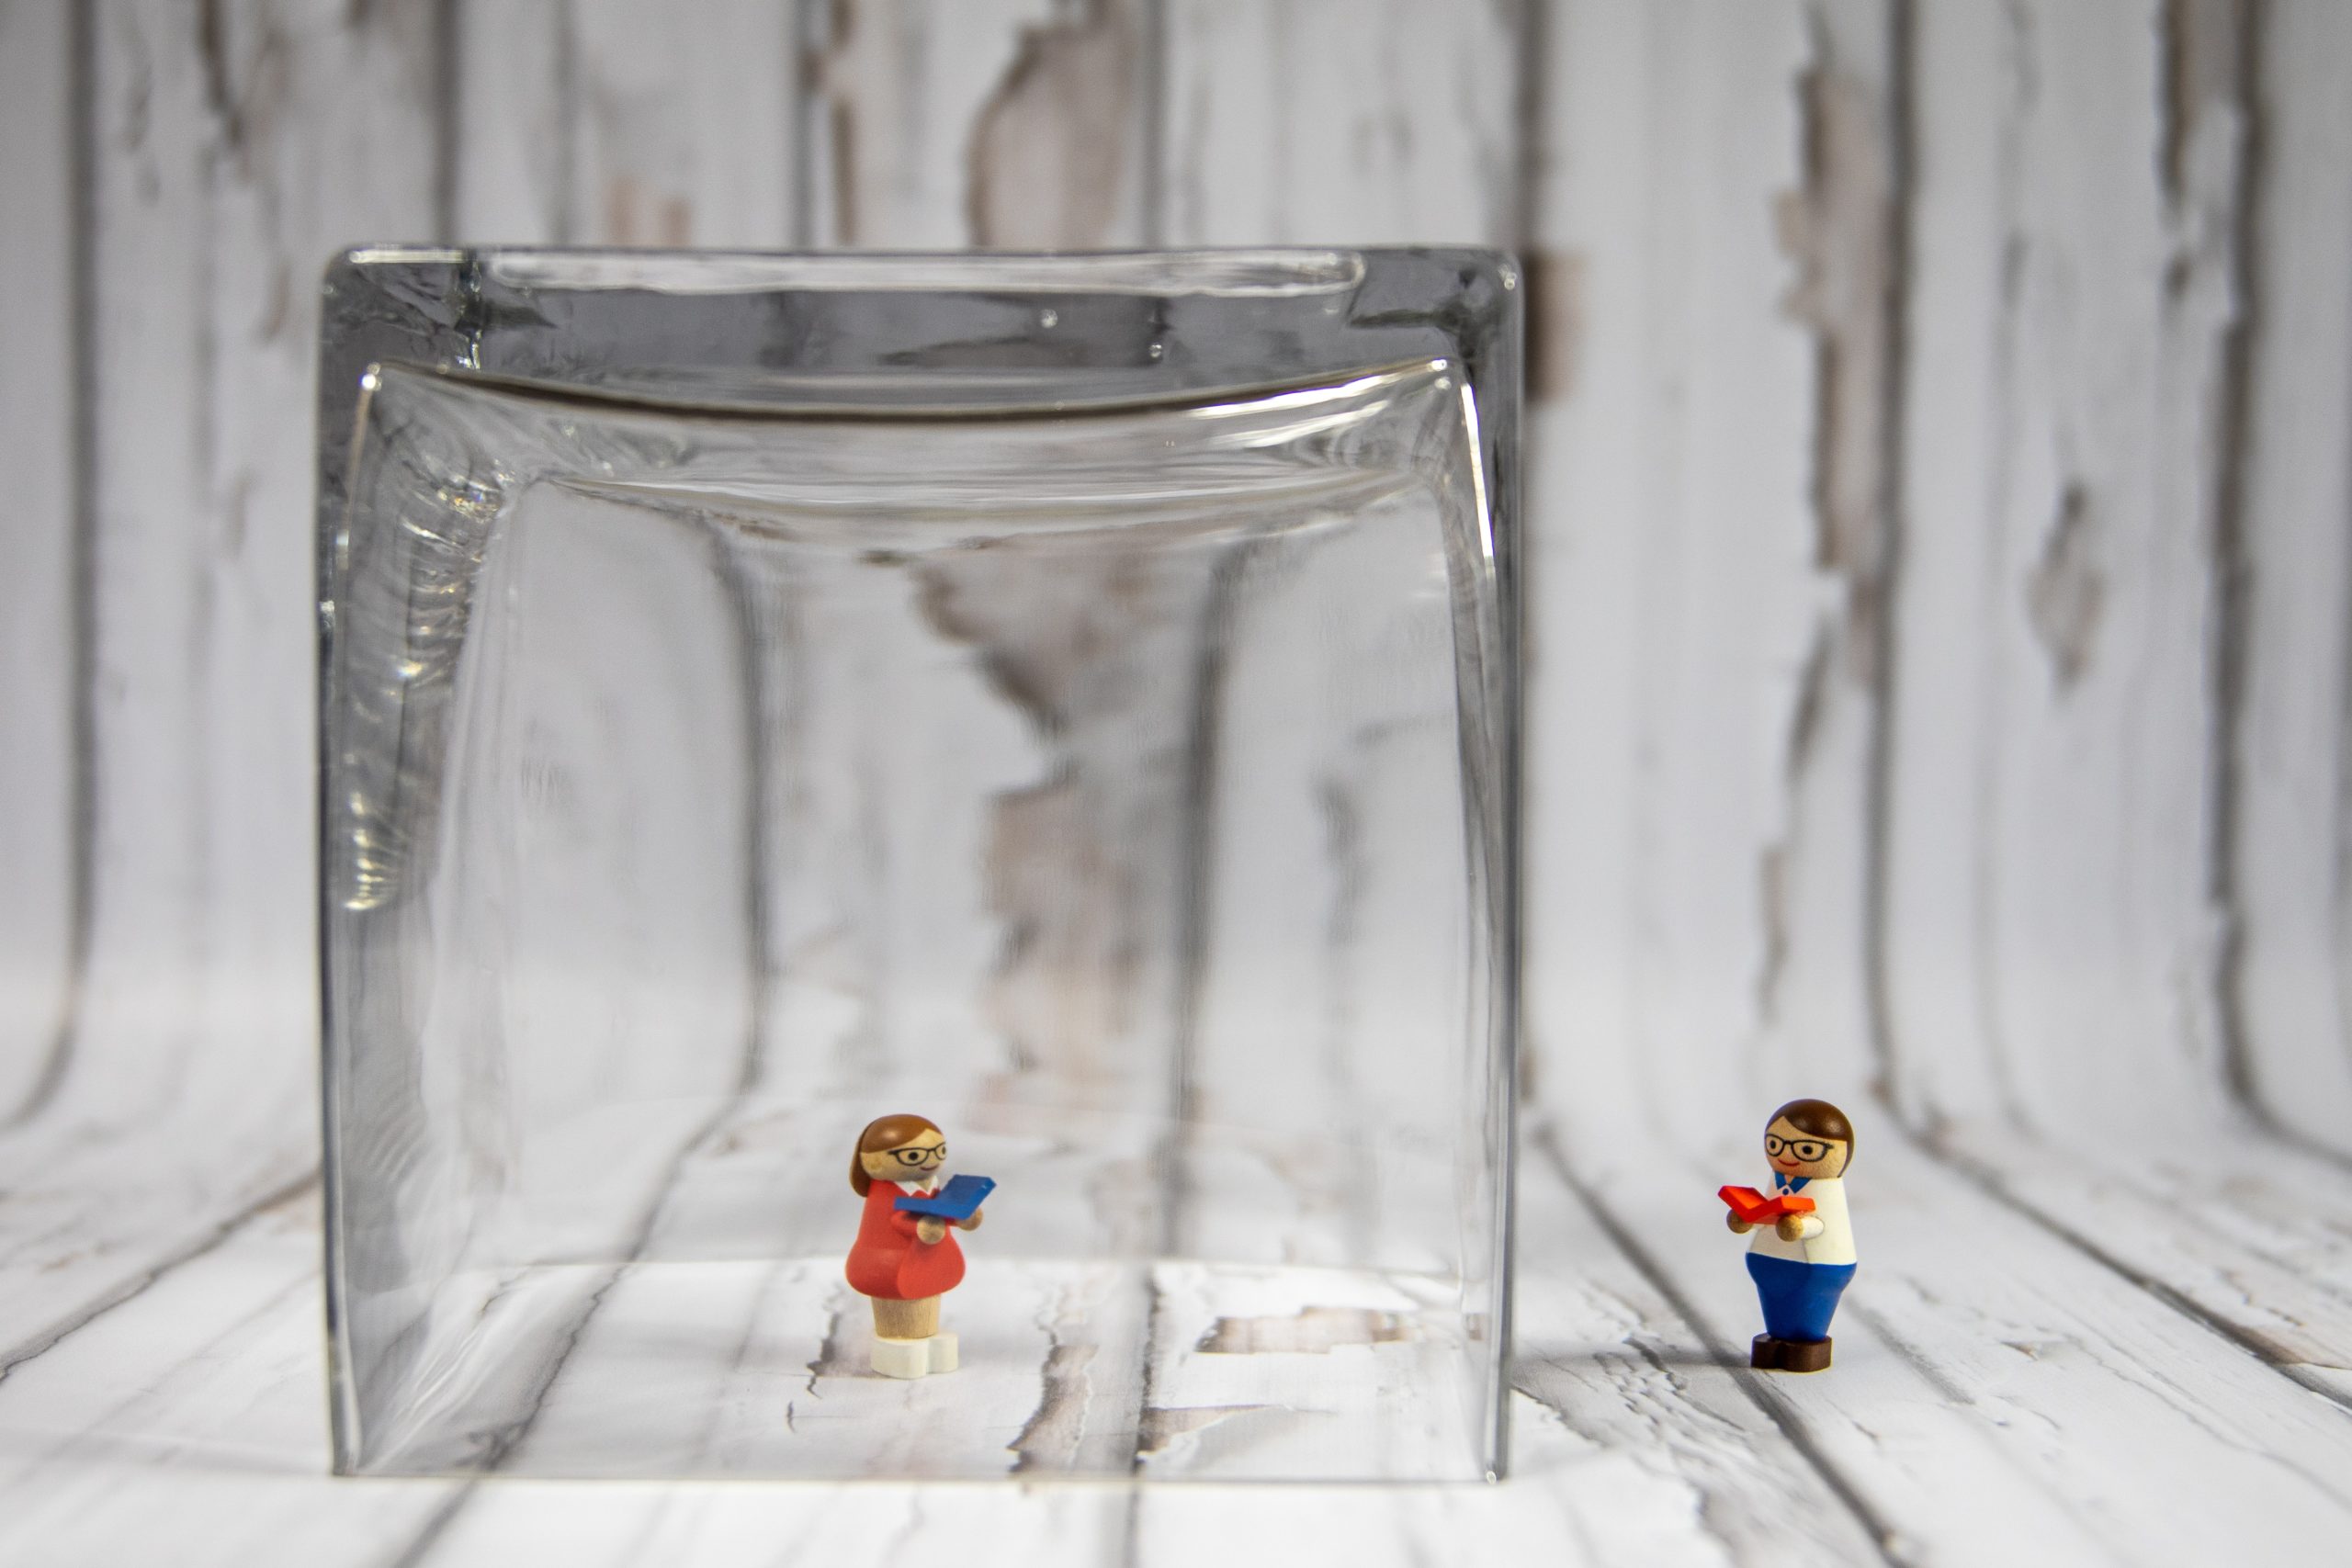 Social distancing Lego figures with glass vase